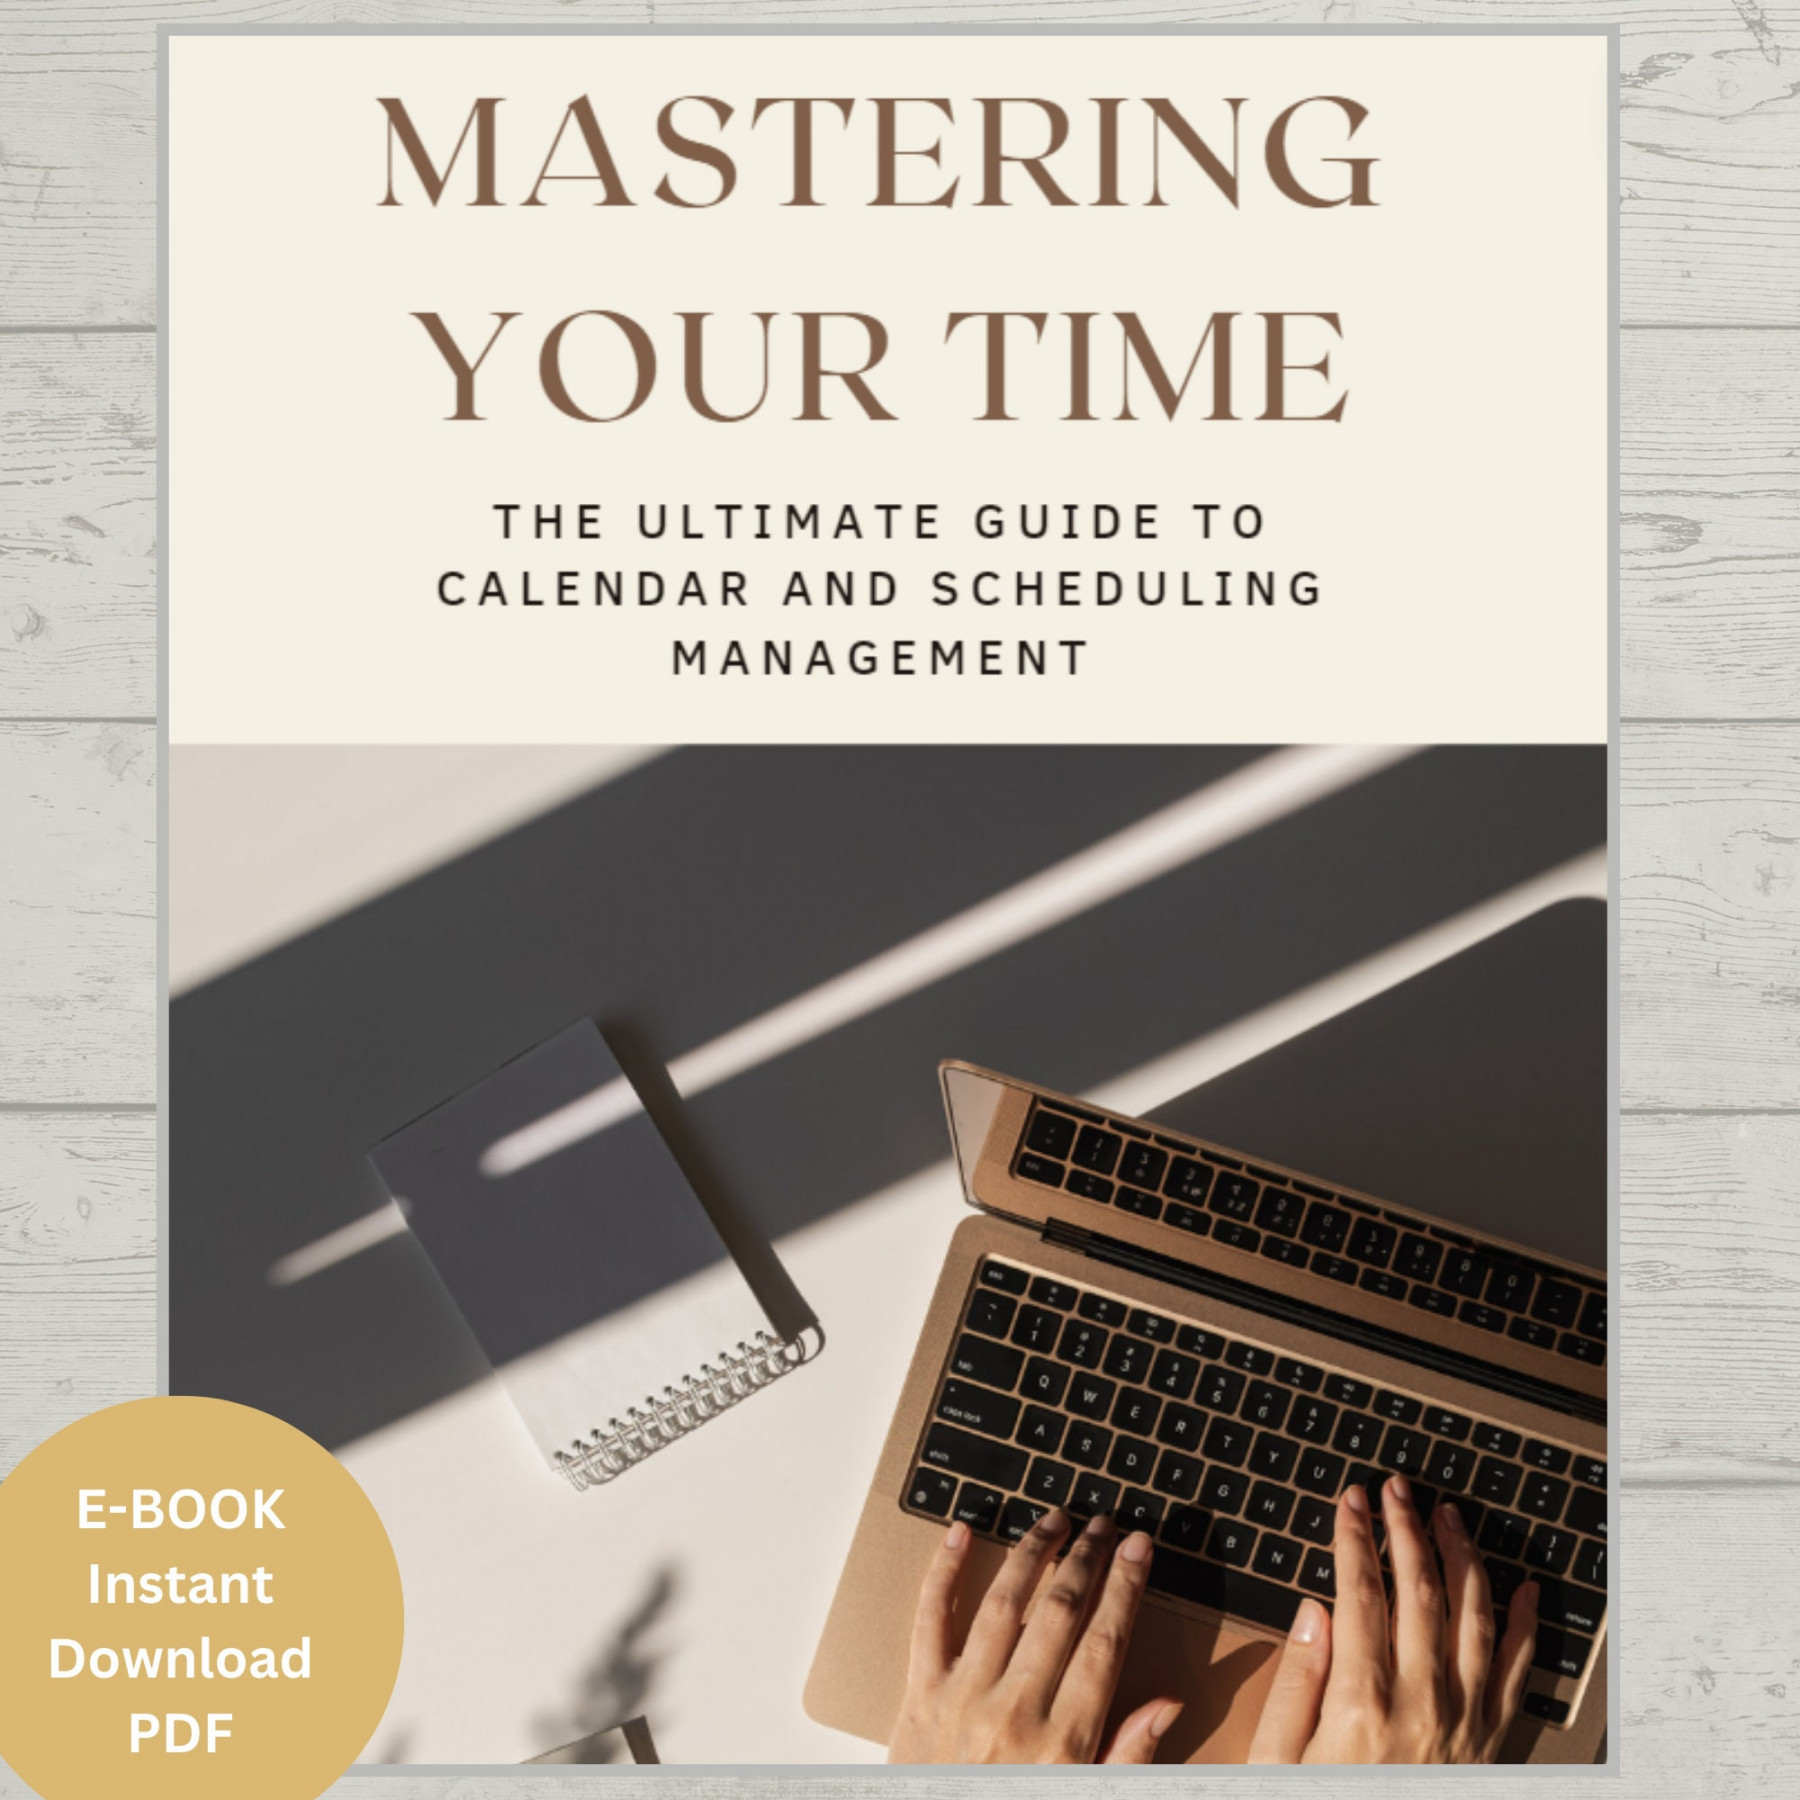 E Book Mastering Your Time The Ultimate Guide to Calendar and Scheduling Management